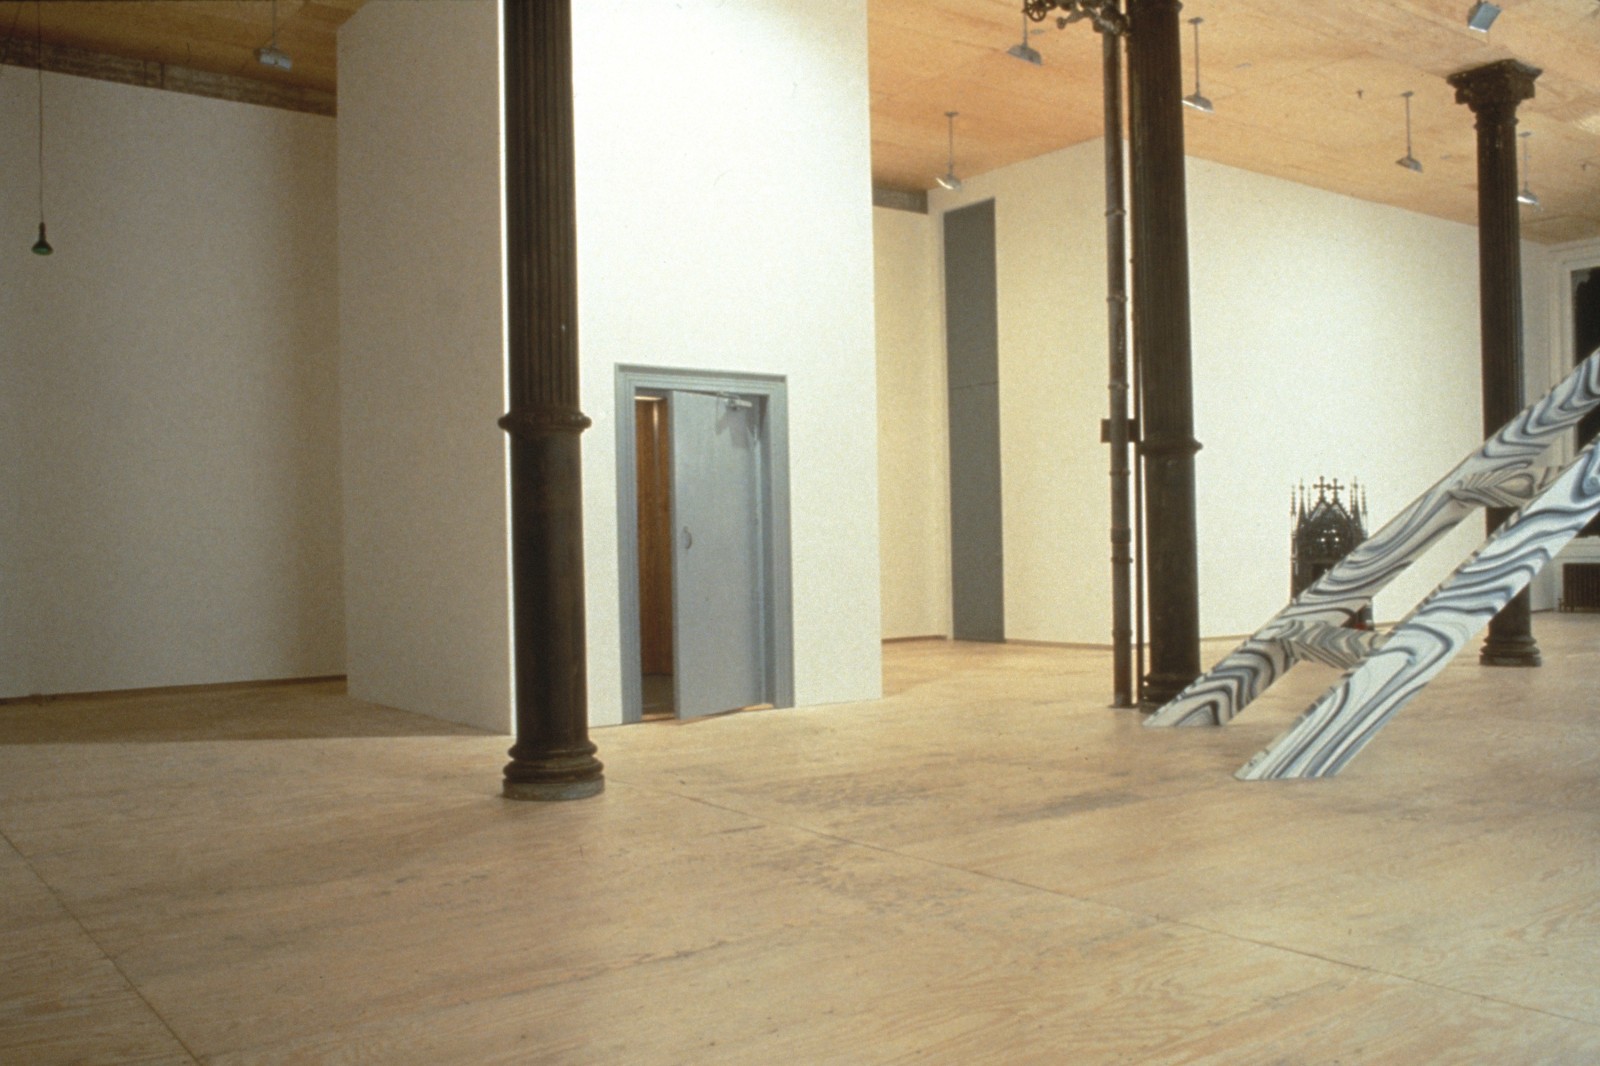 Installation view of Moving Structures at Lehmann Maupin in New York, view 1